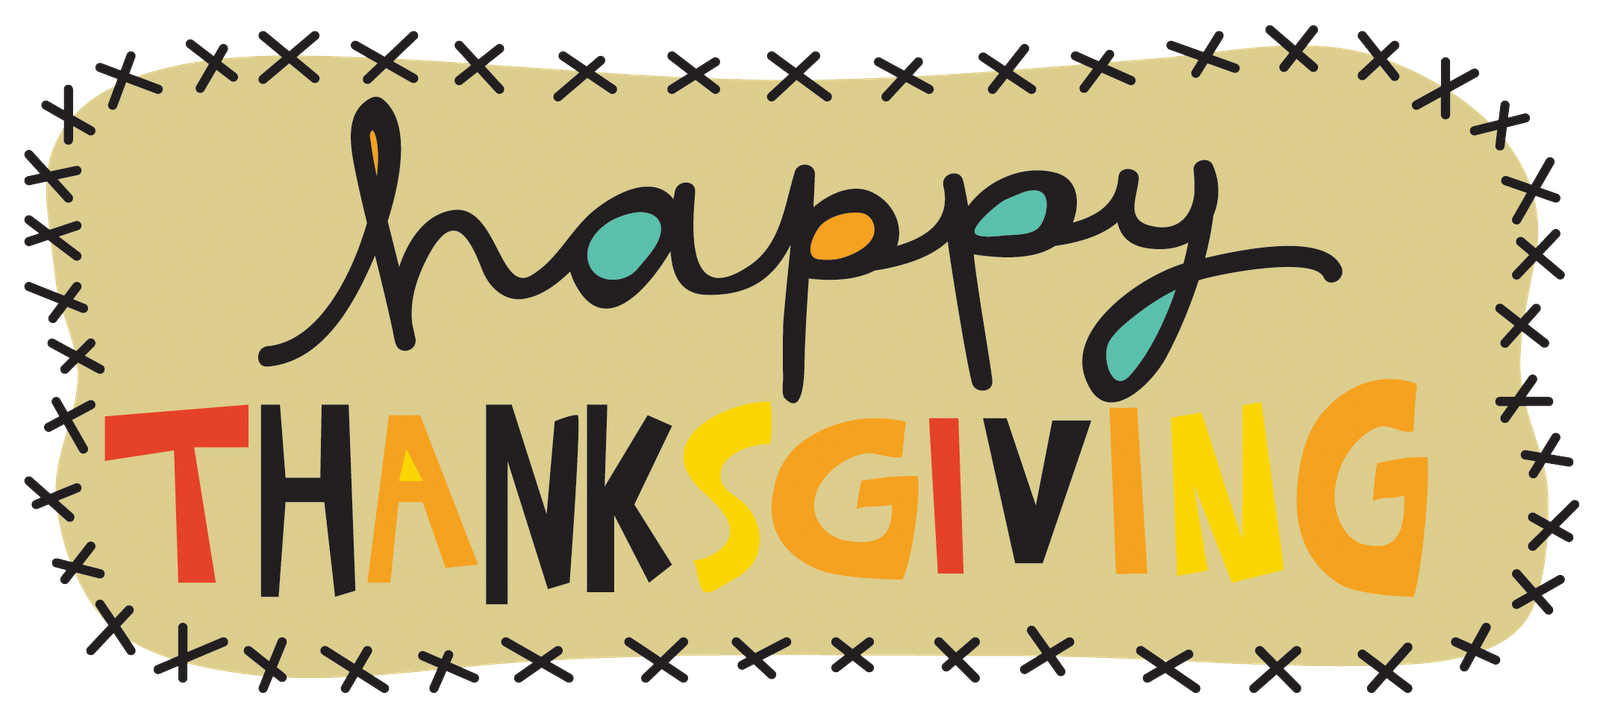 Excited clipart thankful, Excited thankful Transparent FREE.